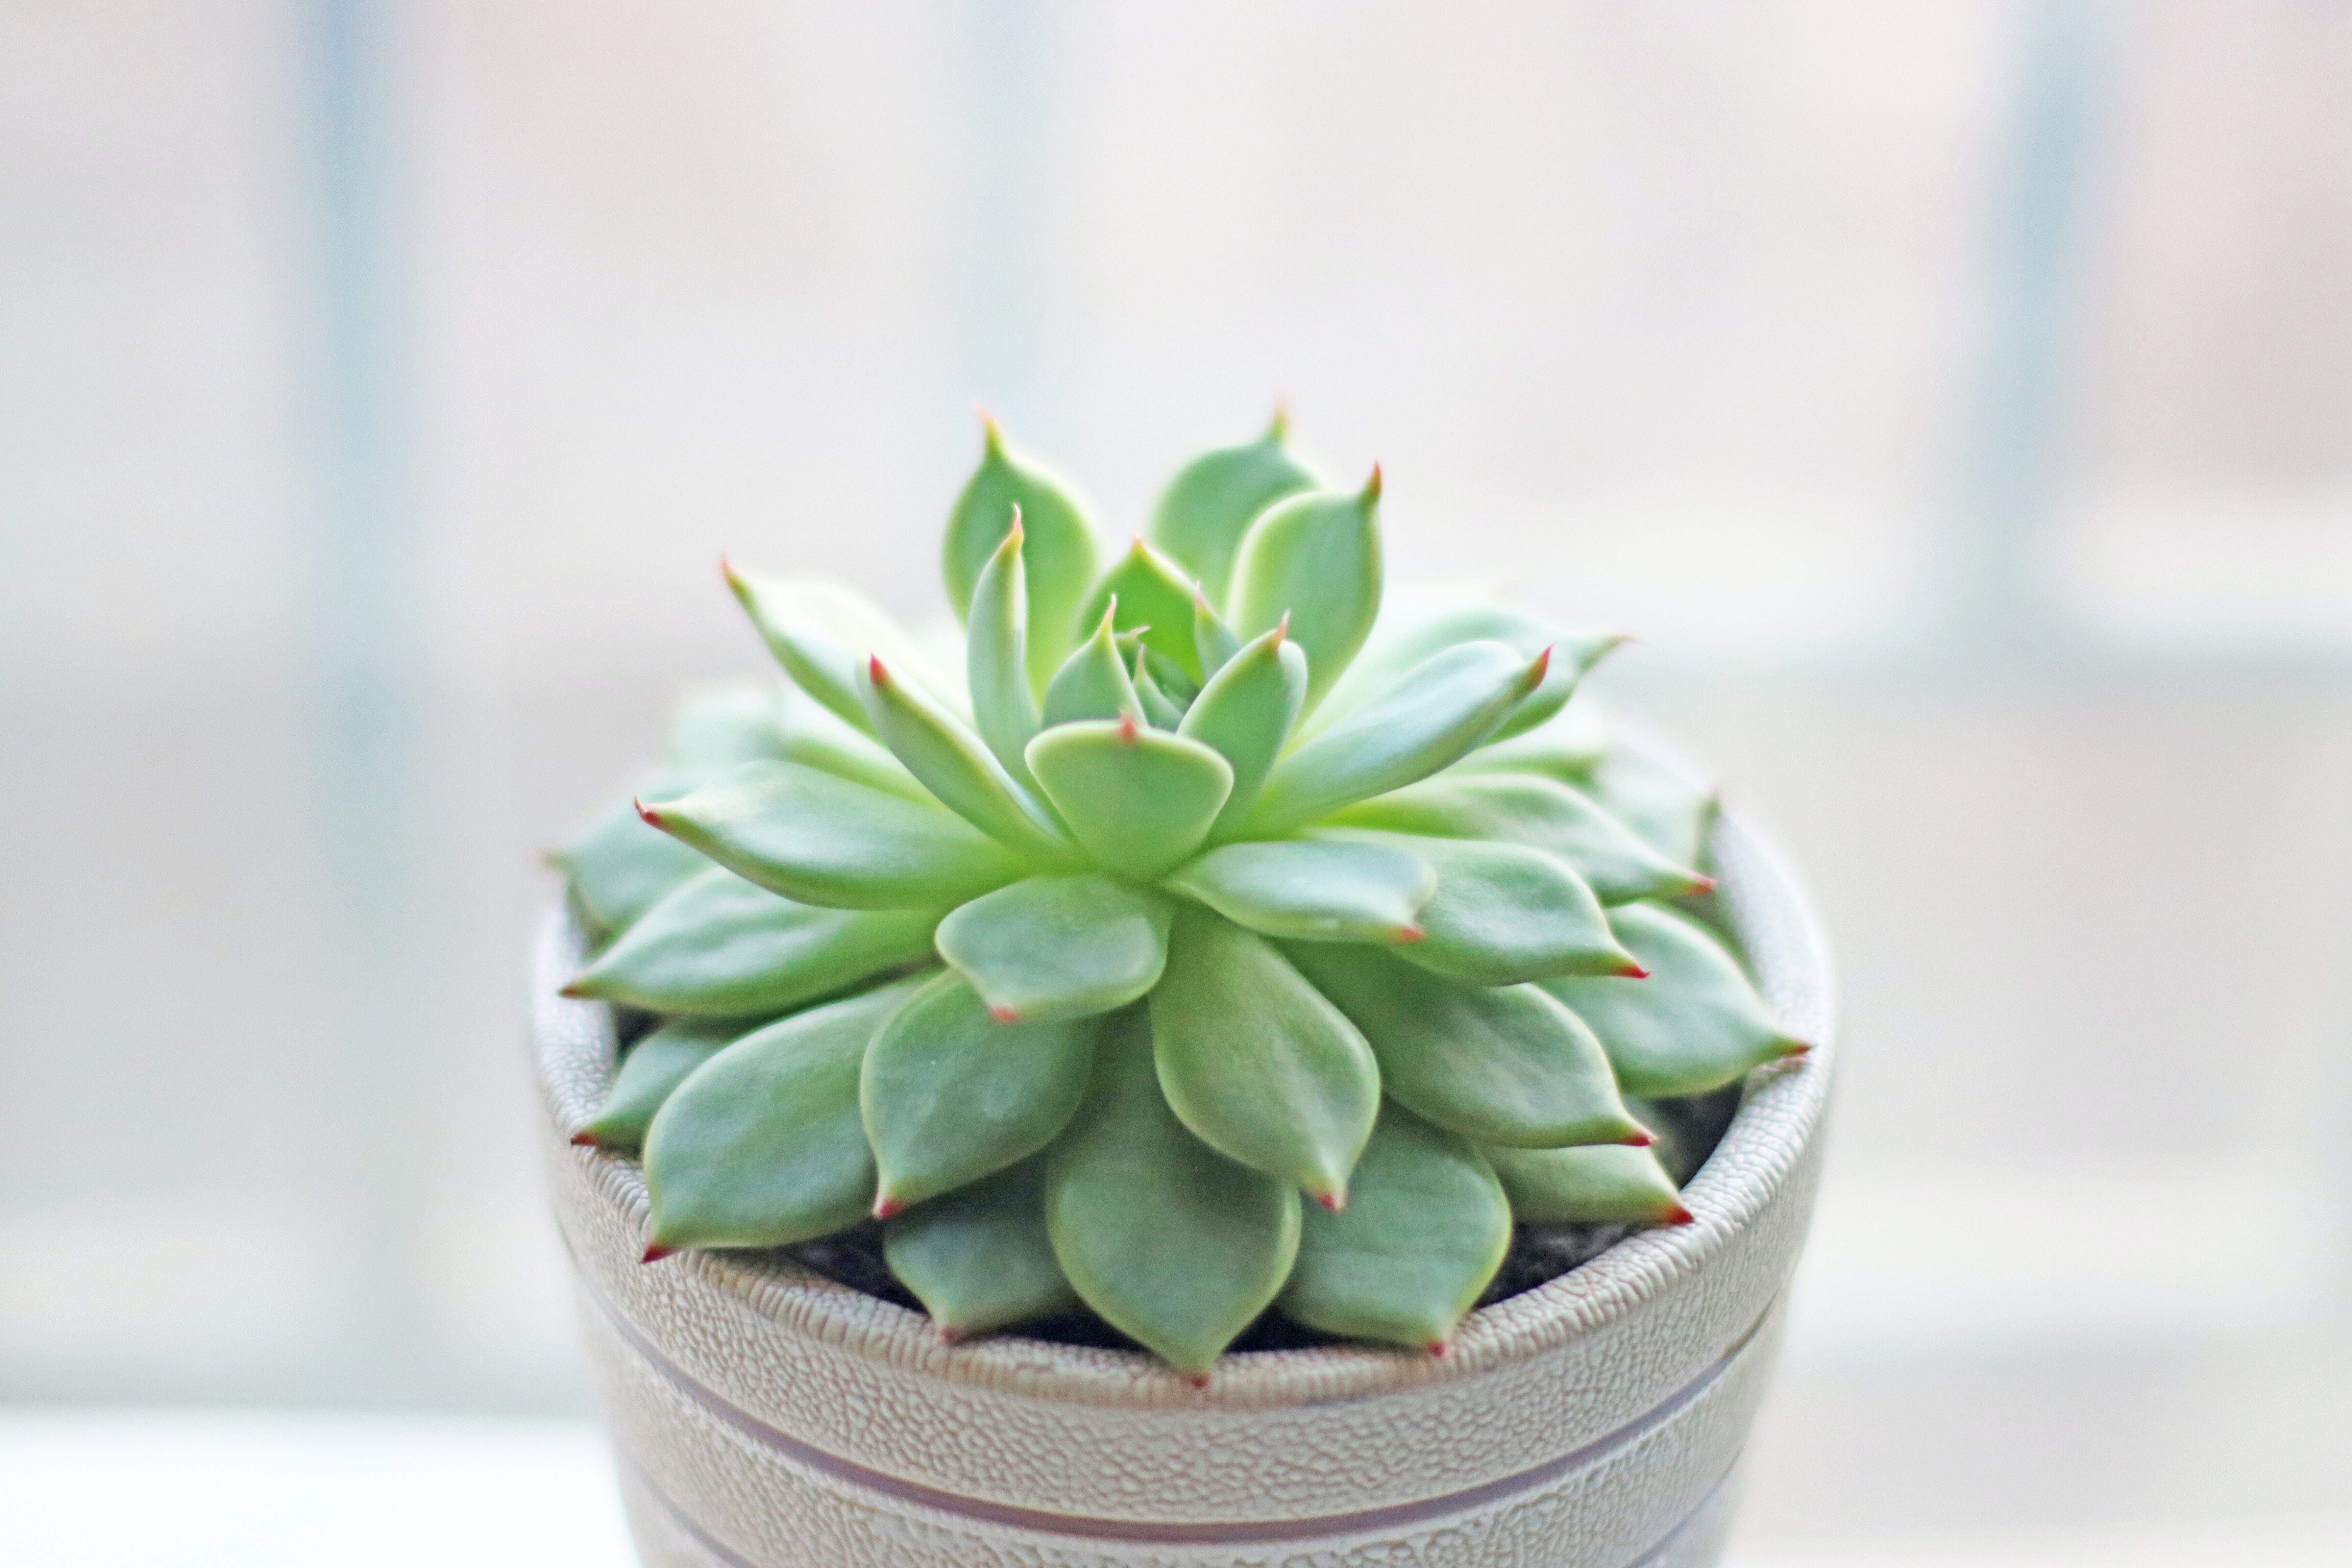 Echeveria is a pet-friendly non-toxic succulent with fleshy green leaves.